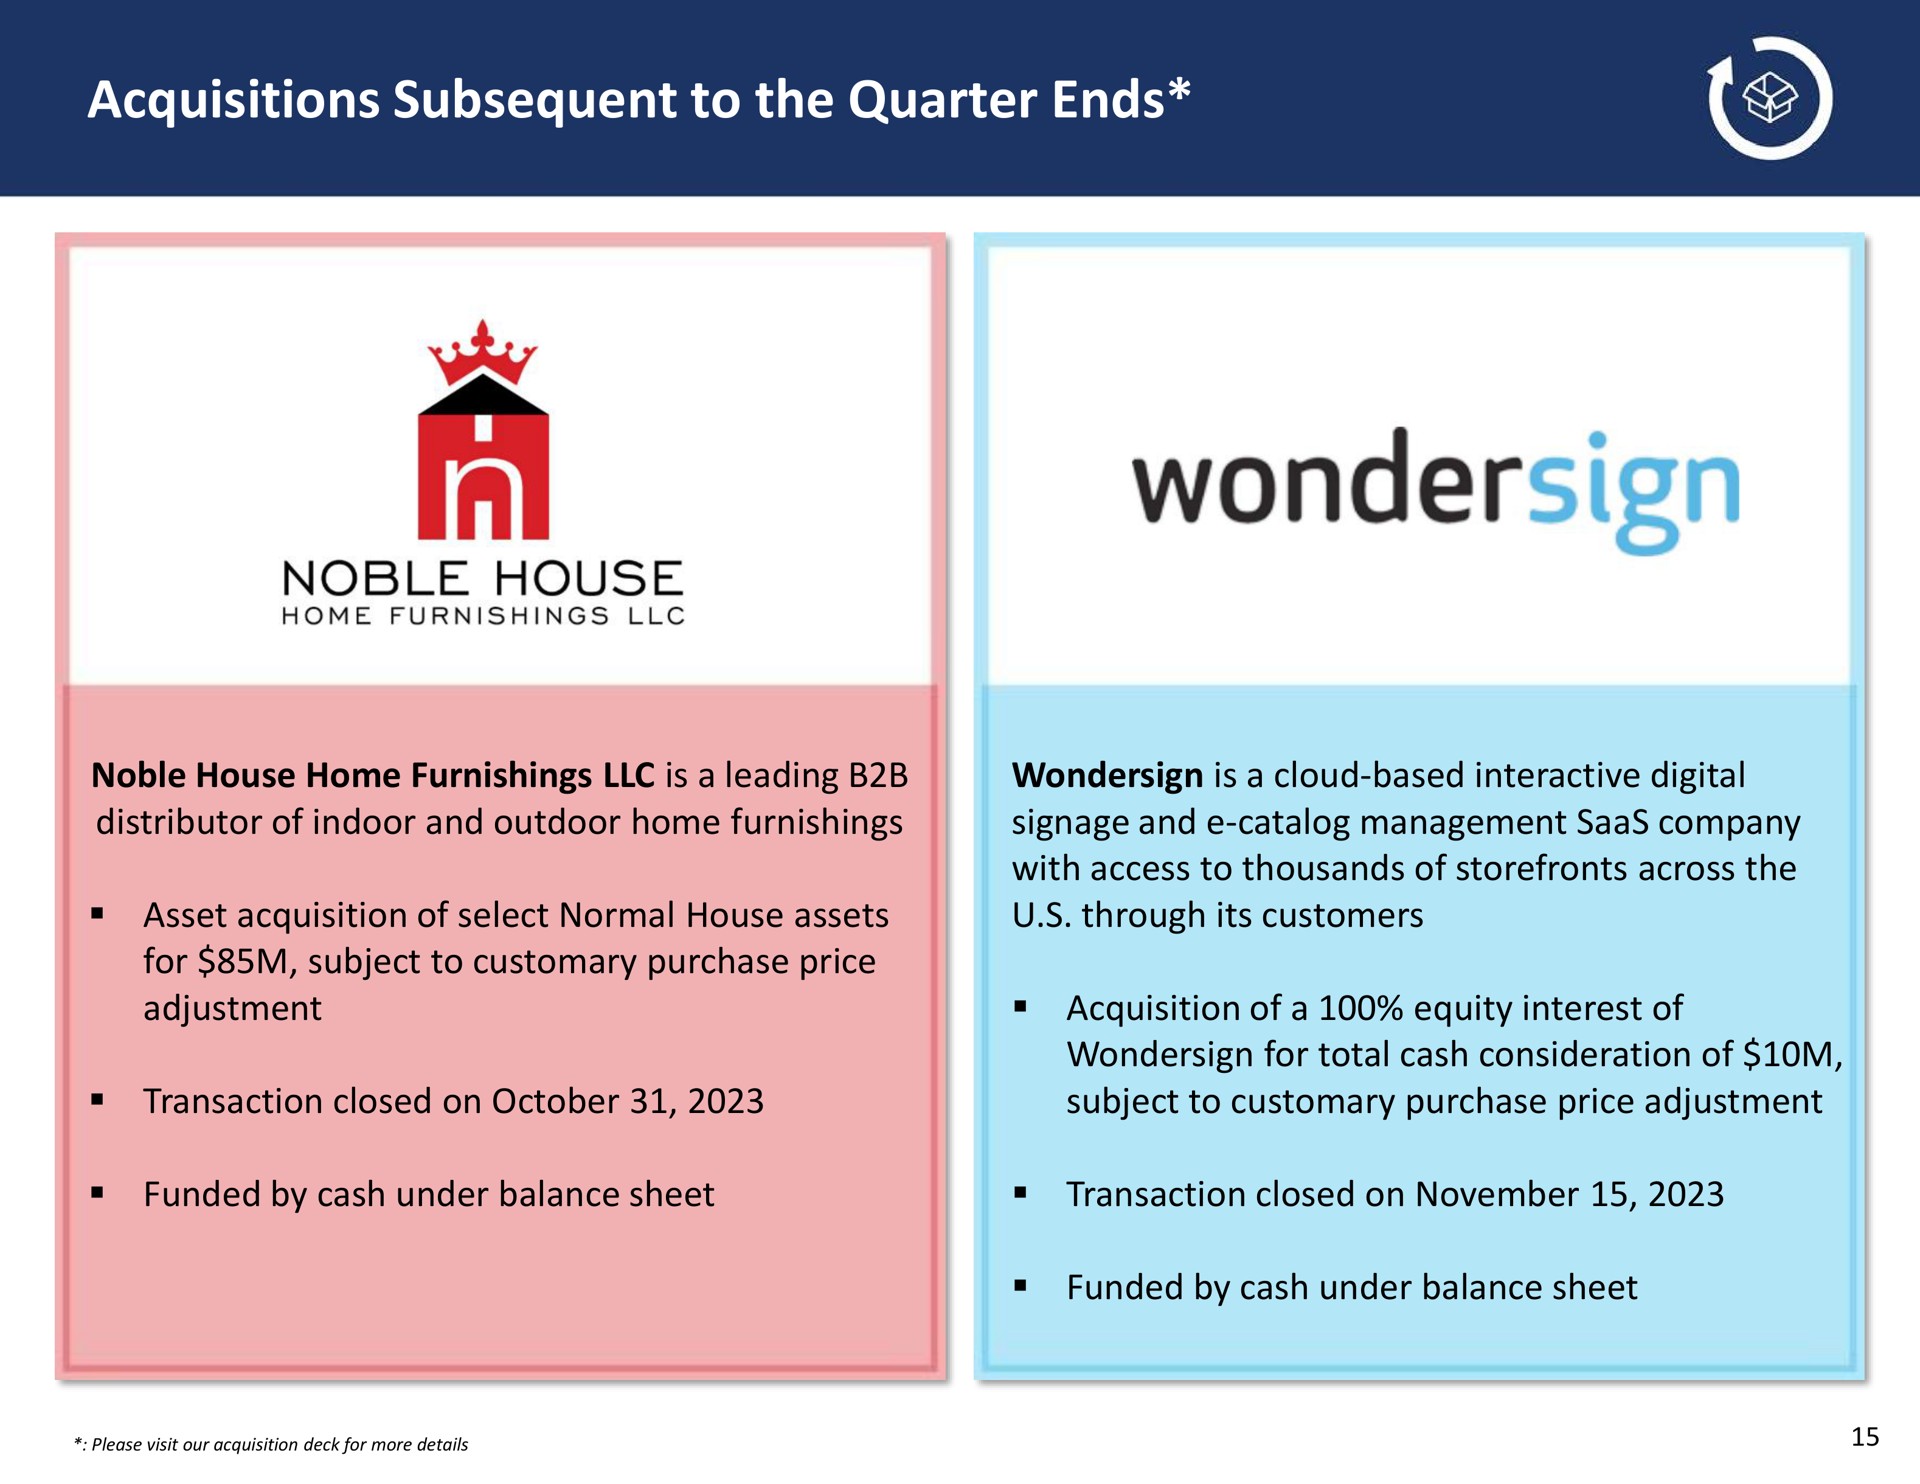 acquisitions subsequent to the quarter ends noble house wonder | GigaCloud Technology